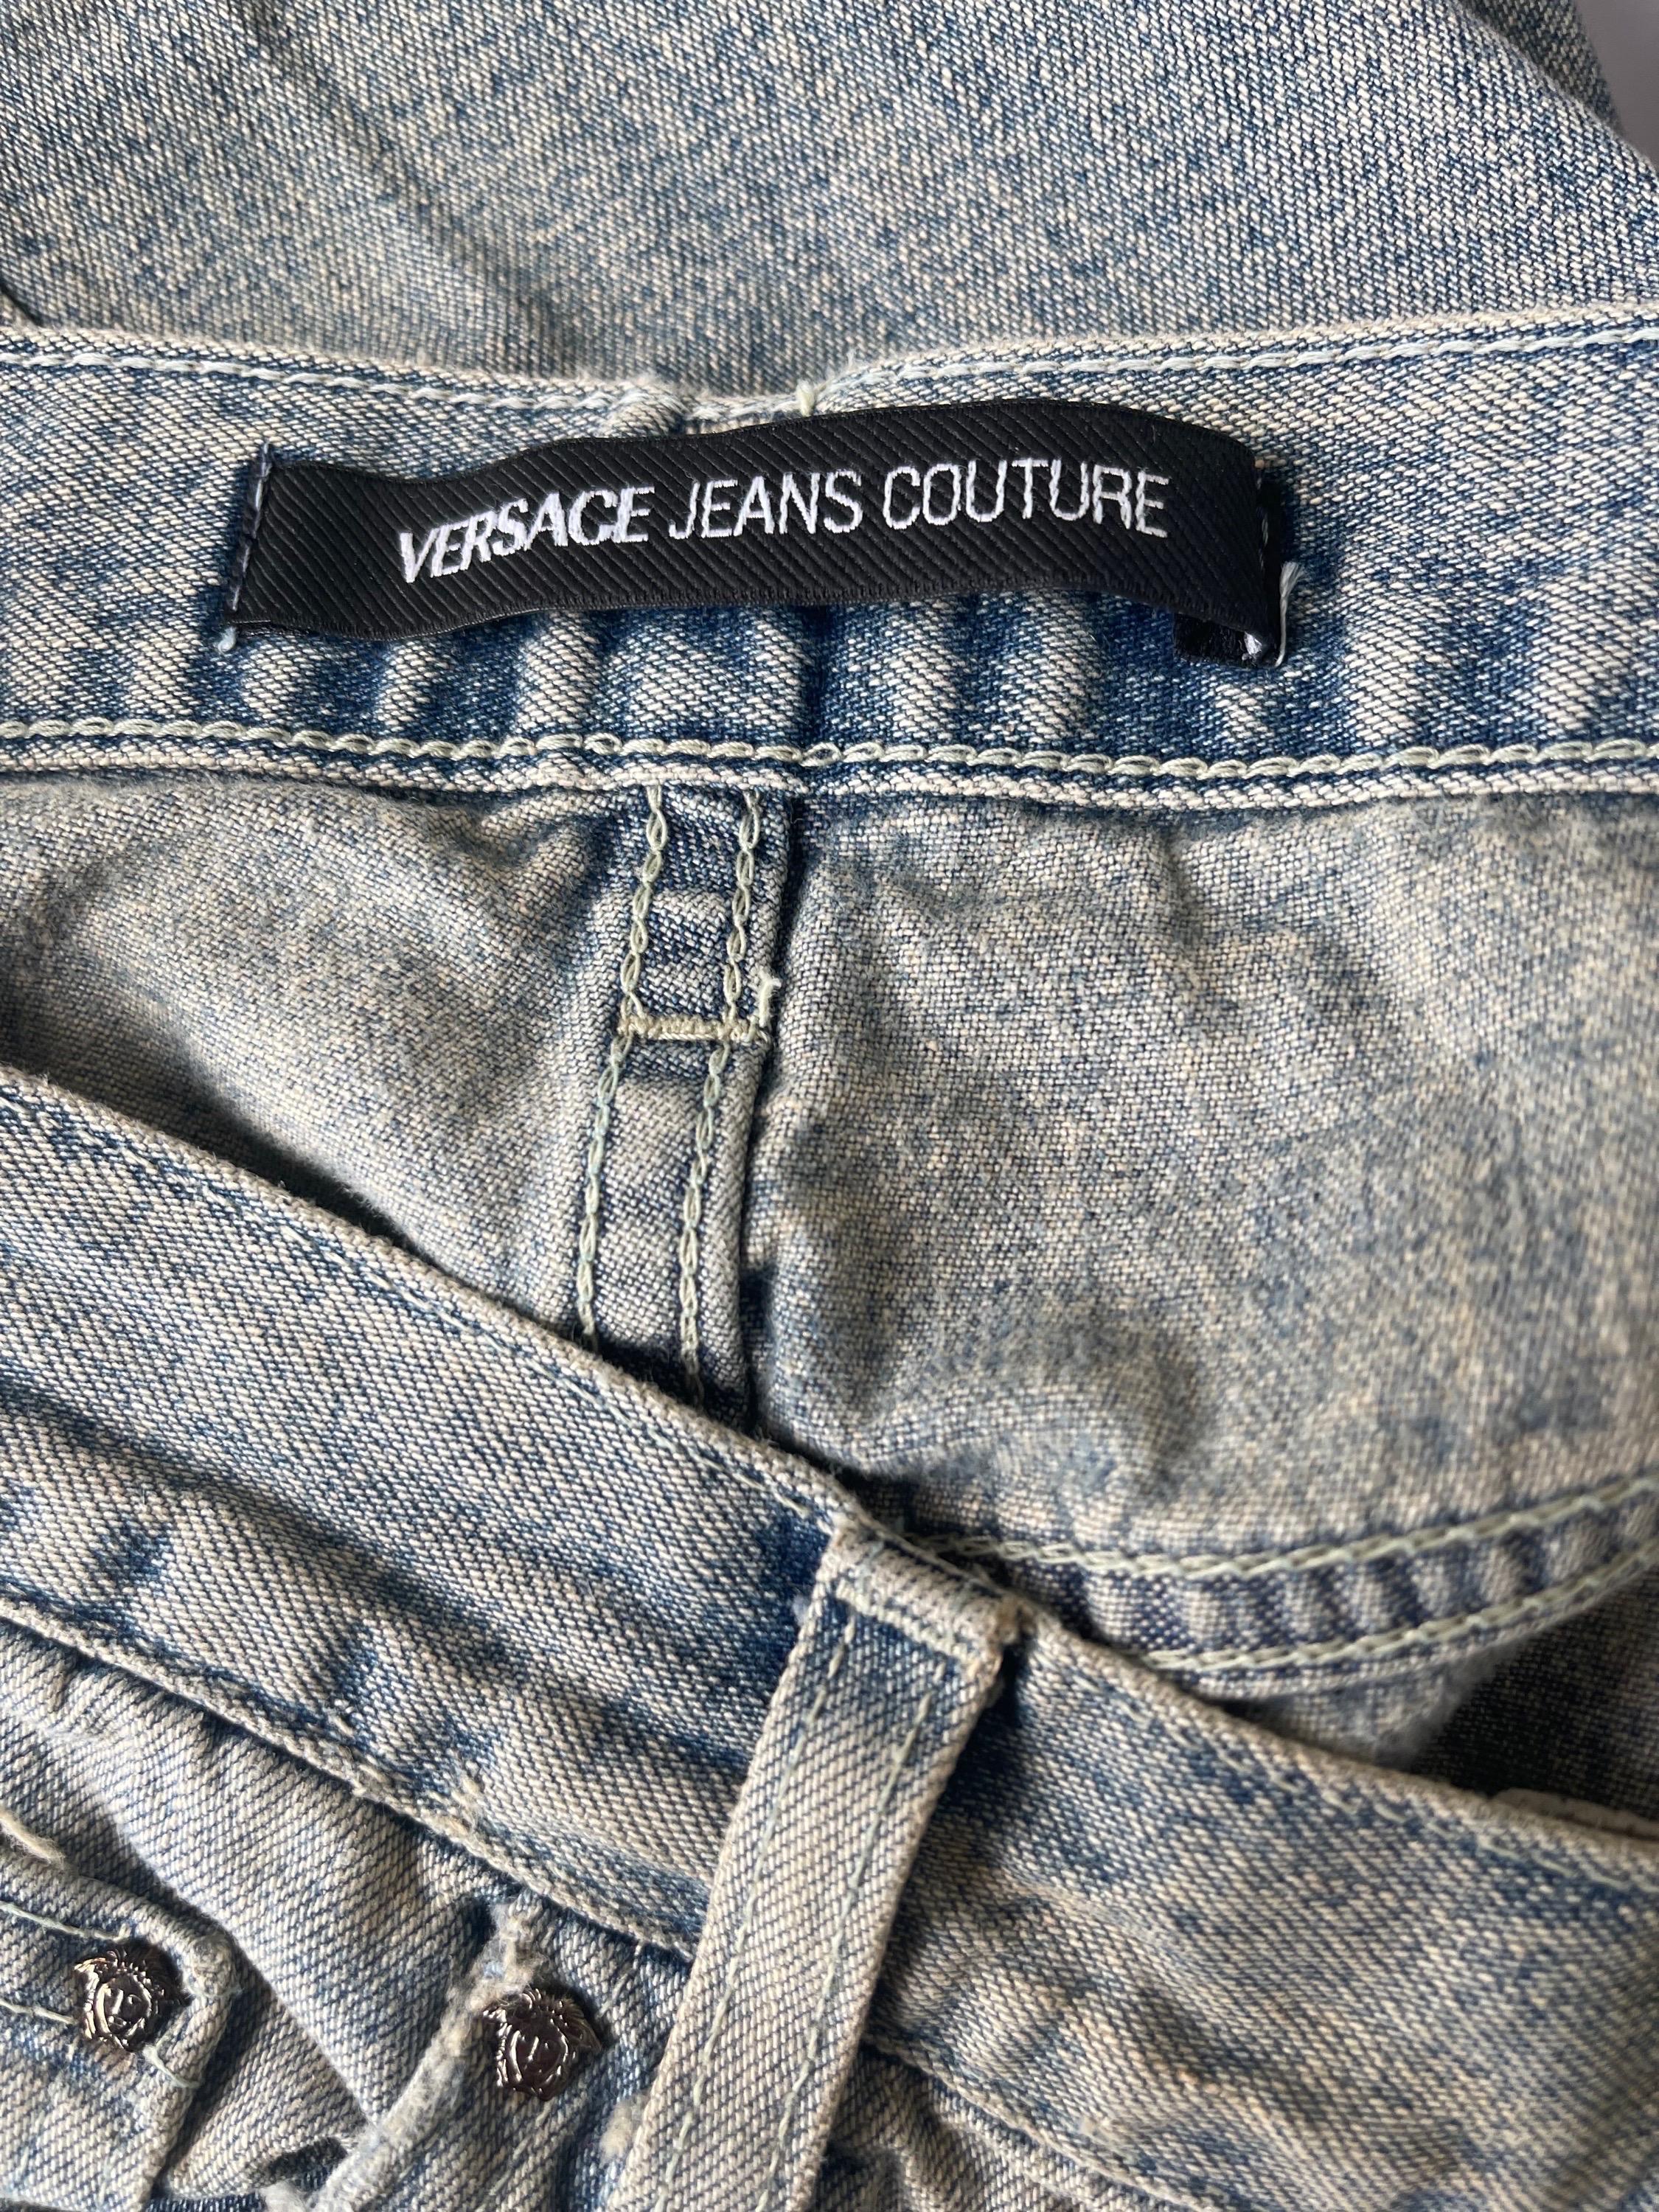 Early 2000s GIANNI VERSACE JEANS COUTURE light stonewash blue low rise wide legs jeans ! Features intricate chain details on the left rear. Two pockets at each side of th waist, with an additional pocket on the back. Button fly closure. 
In great